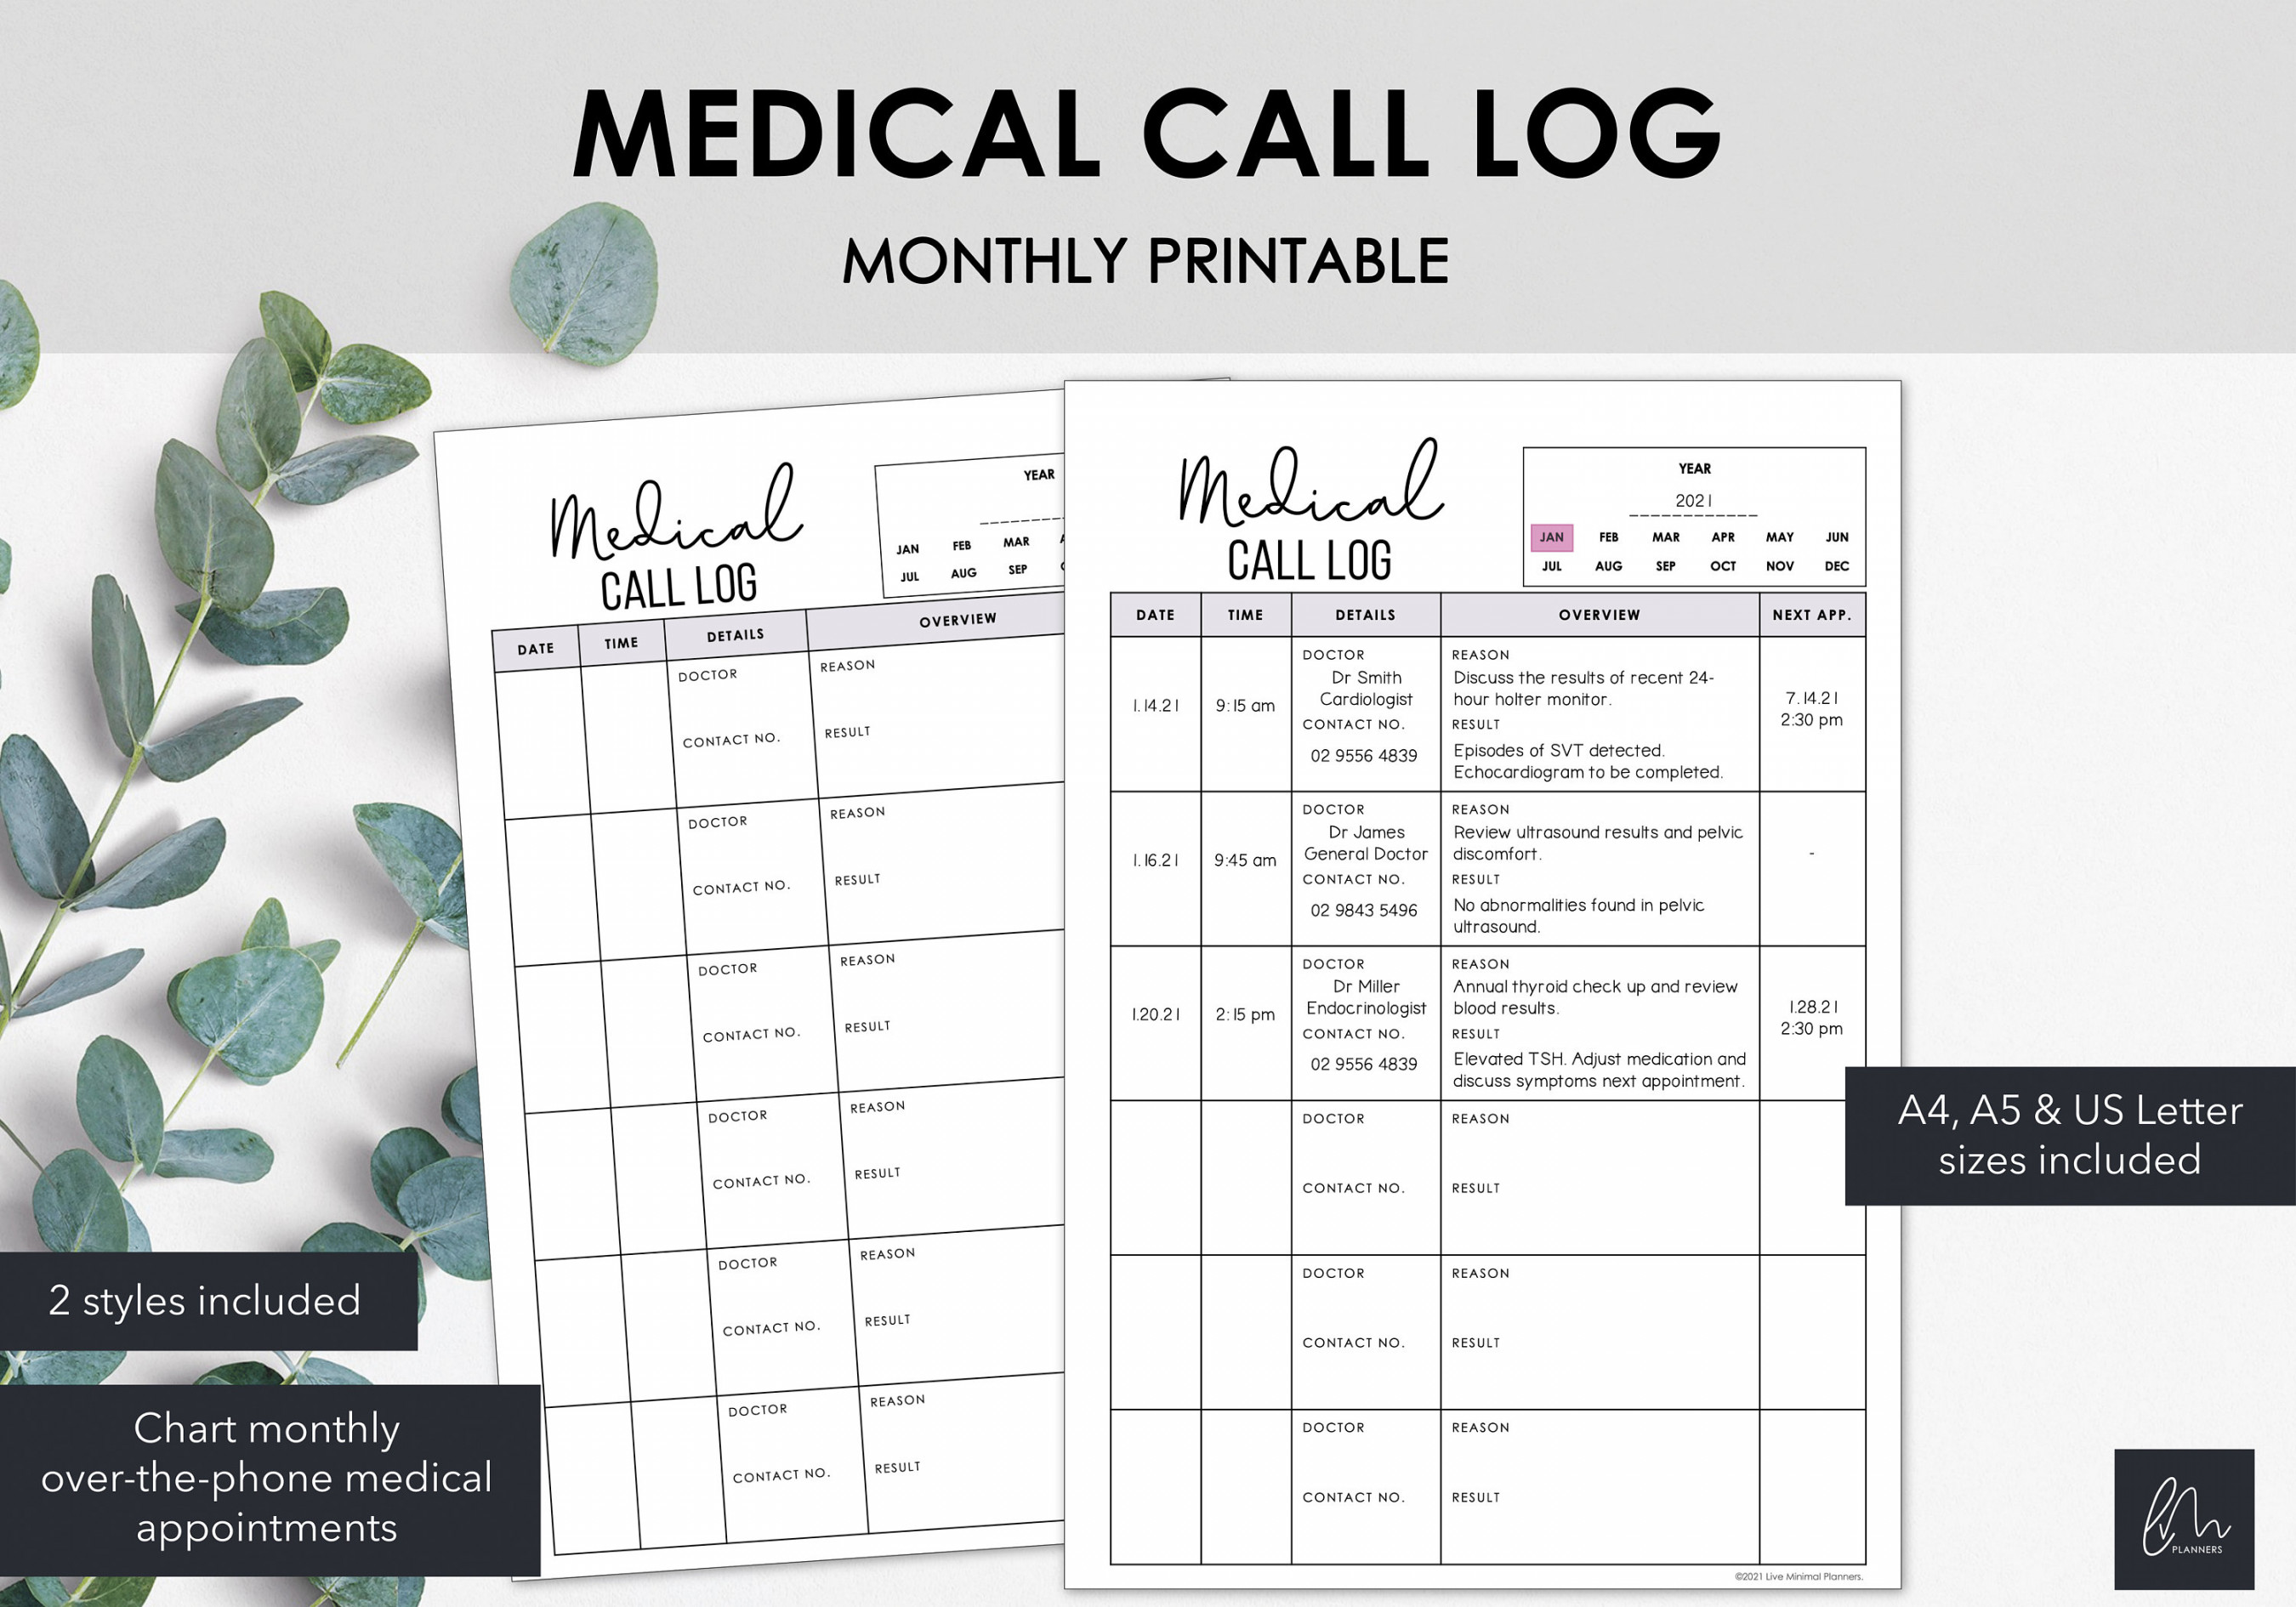 Medical Appointment Call Log Chart Over the Phone Medical - Etsy